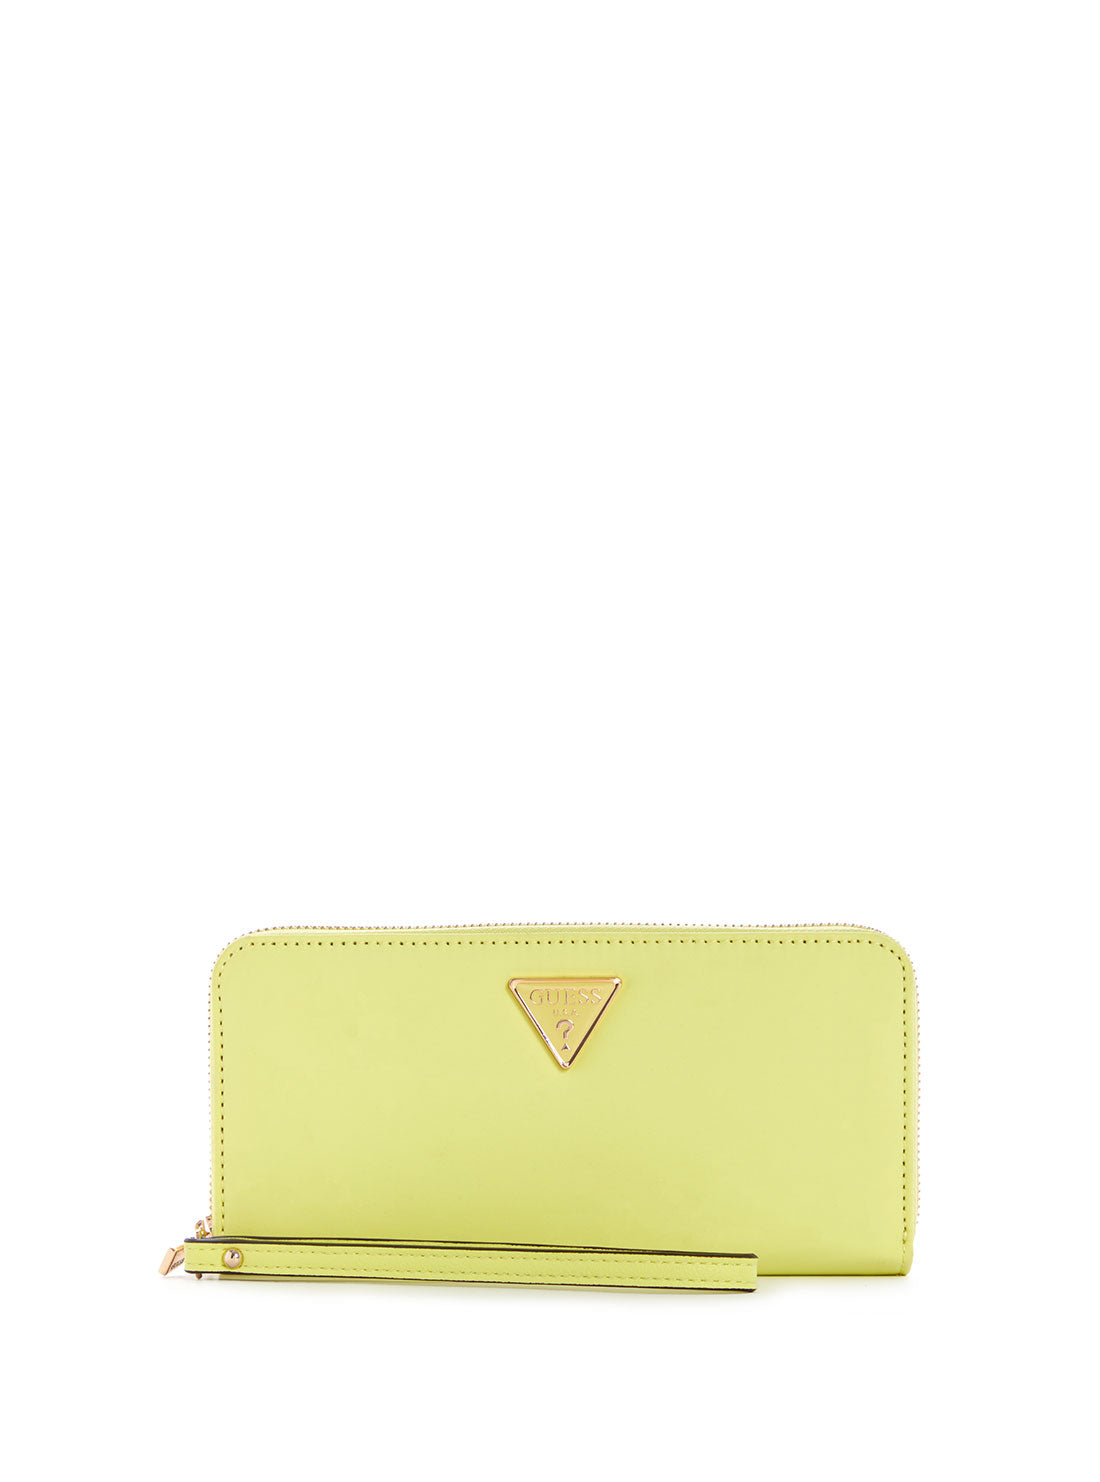 GUESS Women's Eco Lime Green Gemma Large Wallet EYG839546 Front View